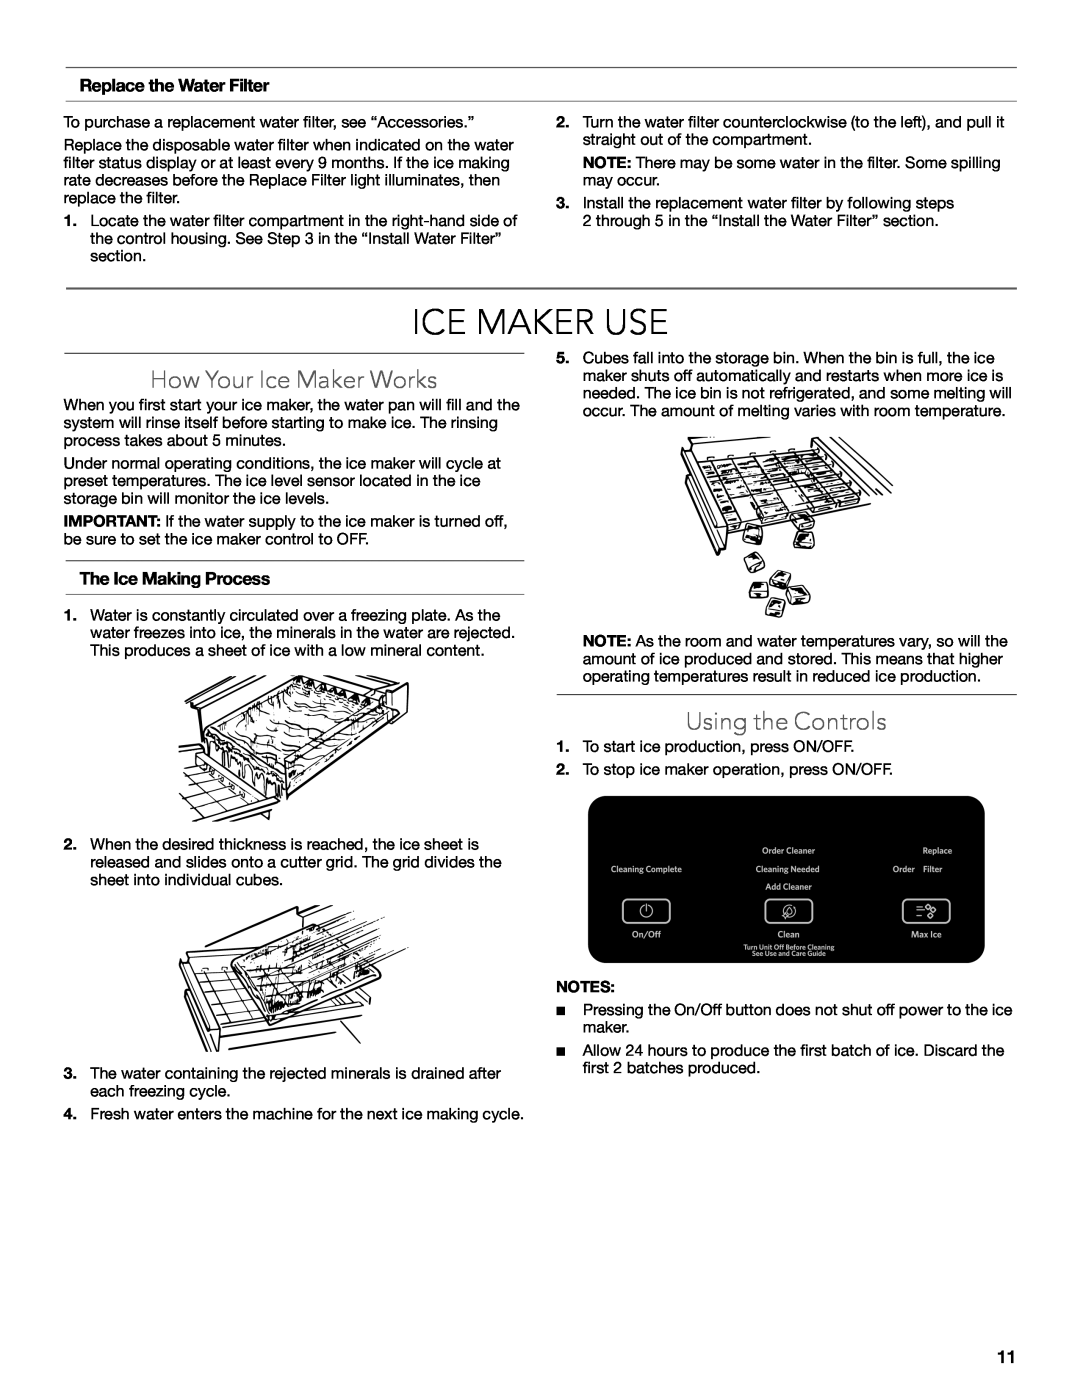 KitchenAid W10515677C manual Ice Maker Use, How Your Ice Maker Works, Using the Controls, Replace the Water Filter 